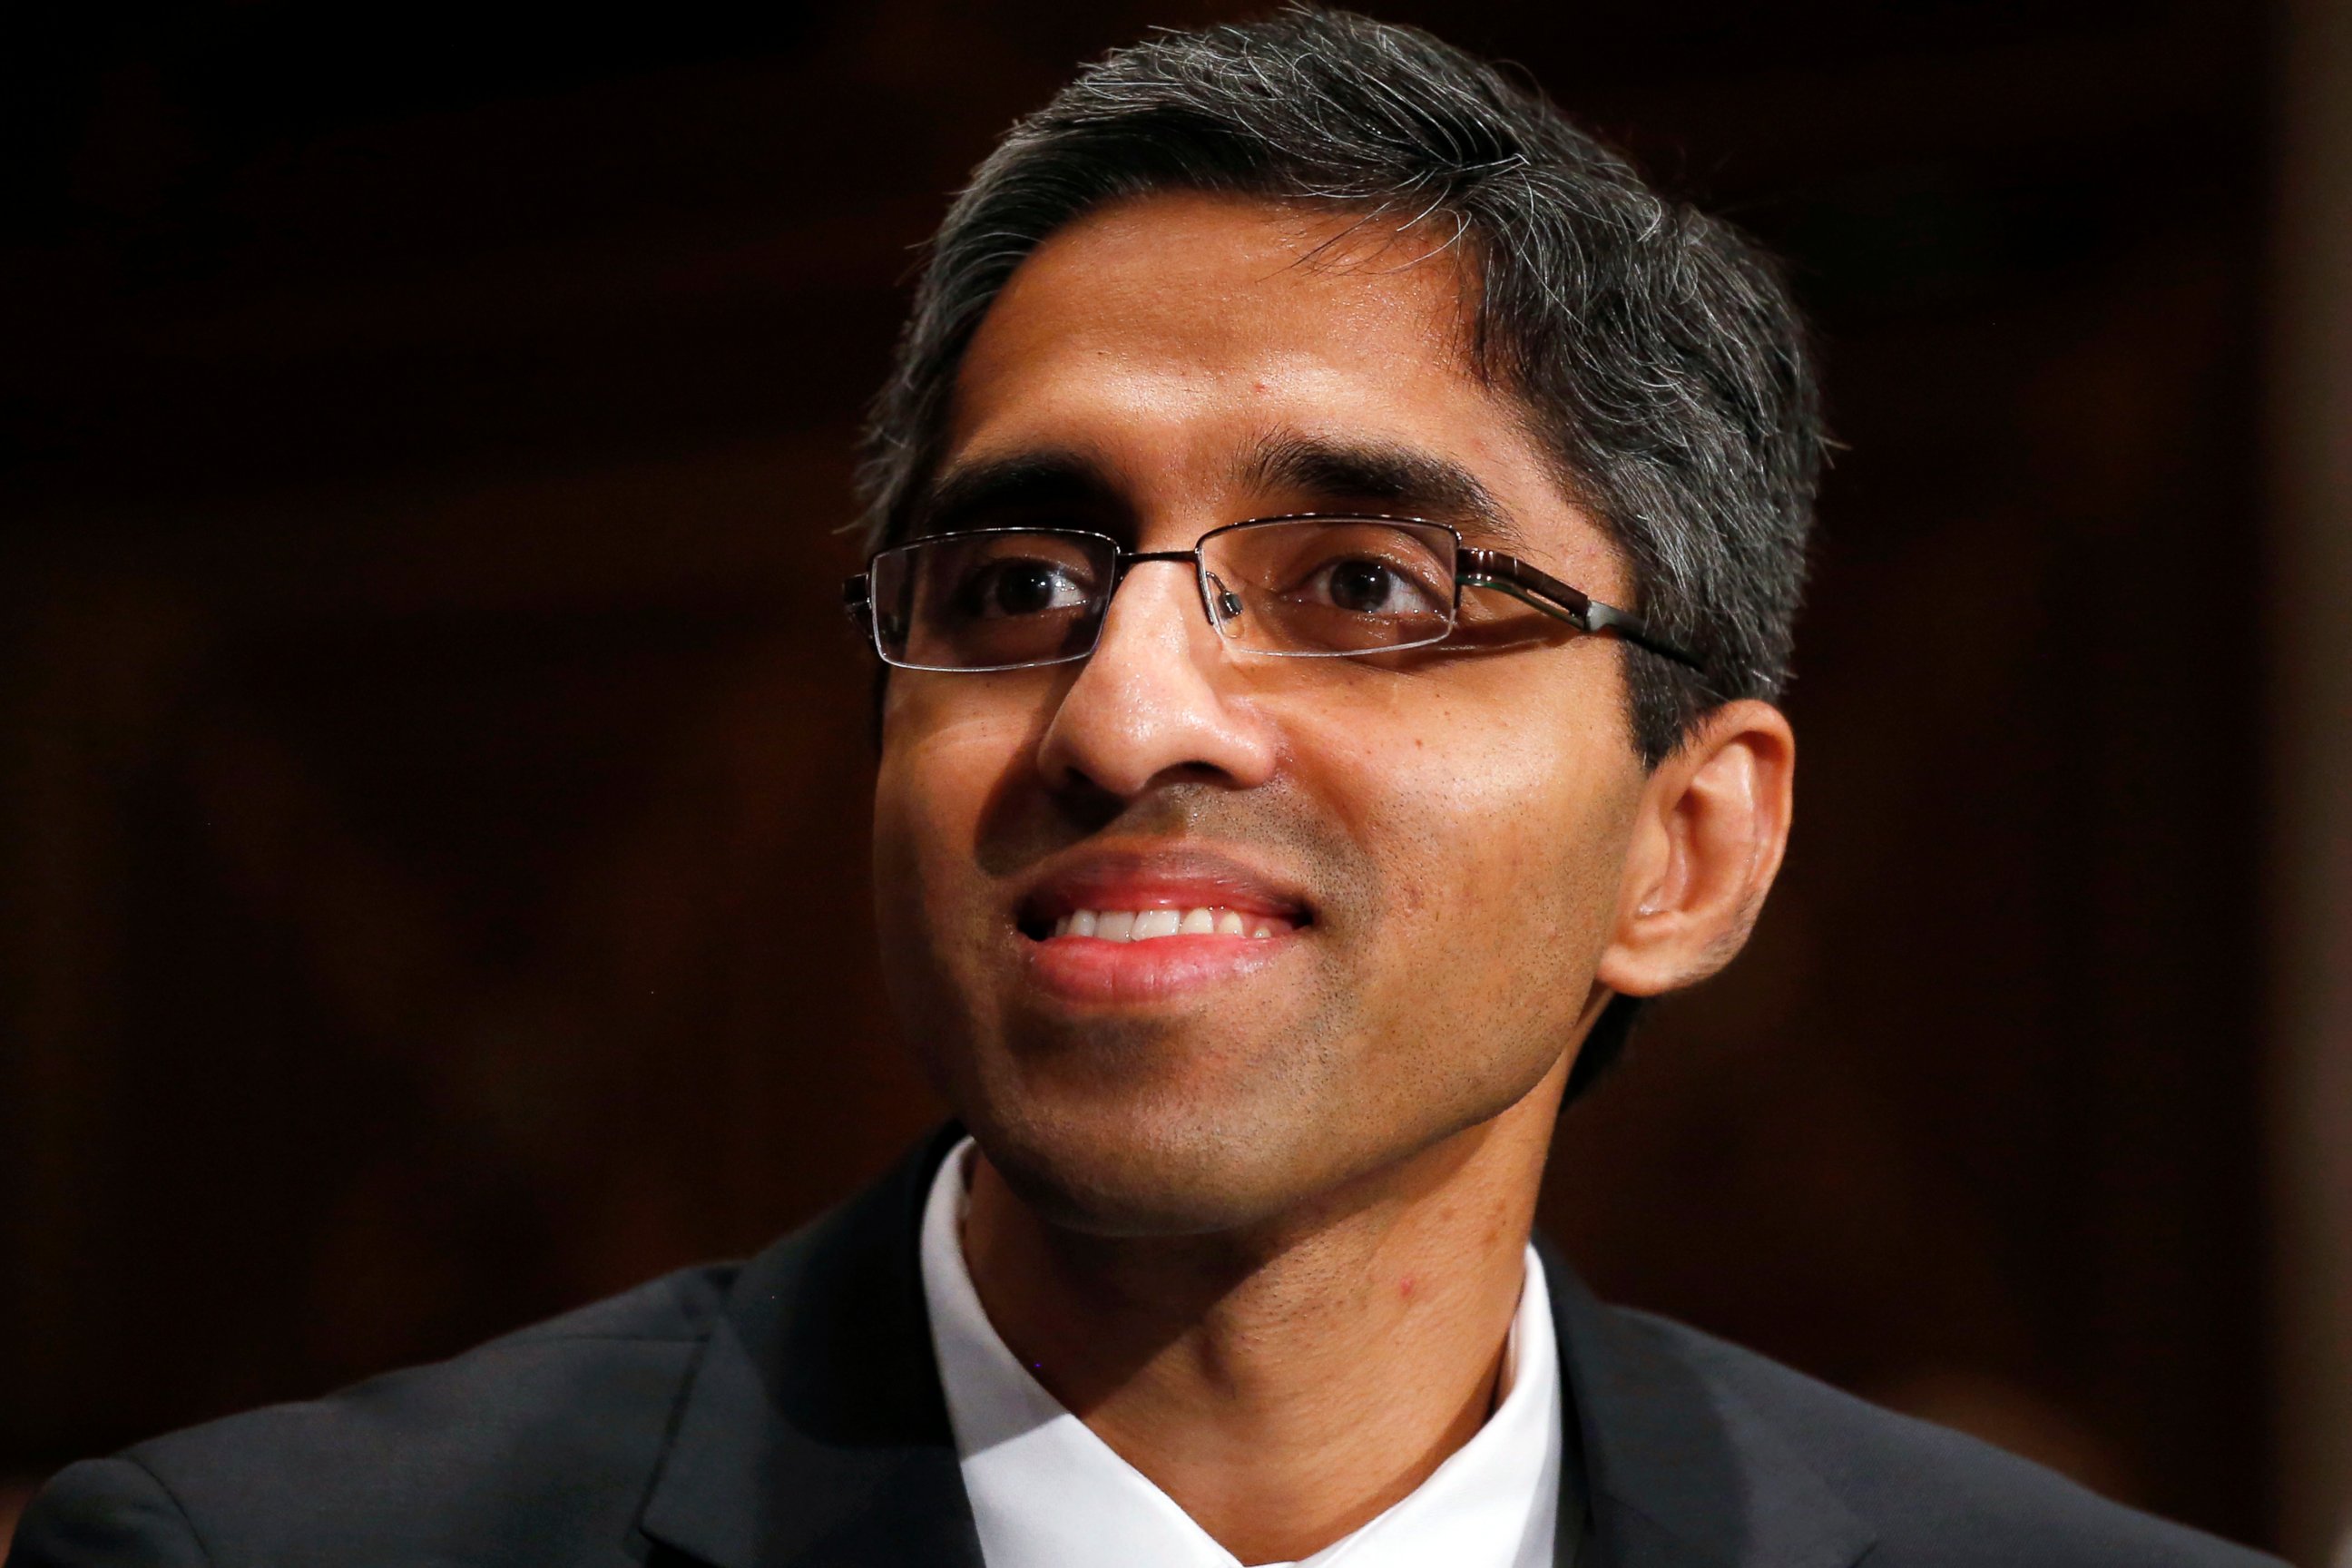 PHOTO: In this Feb. 4, 2014, photo, then U.S. Surgeon General appointee Dr. Vivek Murthy appears on Capitol Hill in Washington. Murthy has been named as co-chair by President-elect Joe Biden to his COVID-19 advisory board.